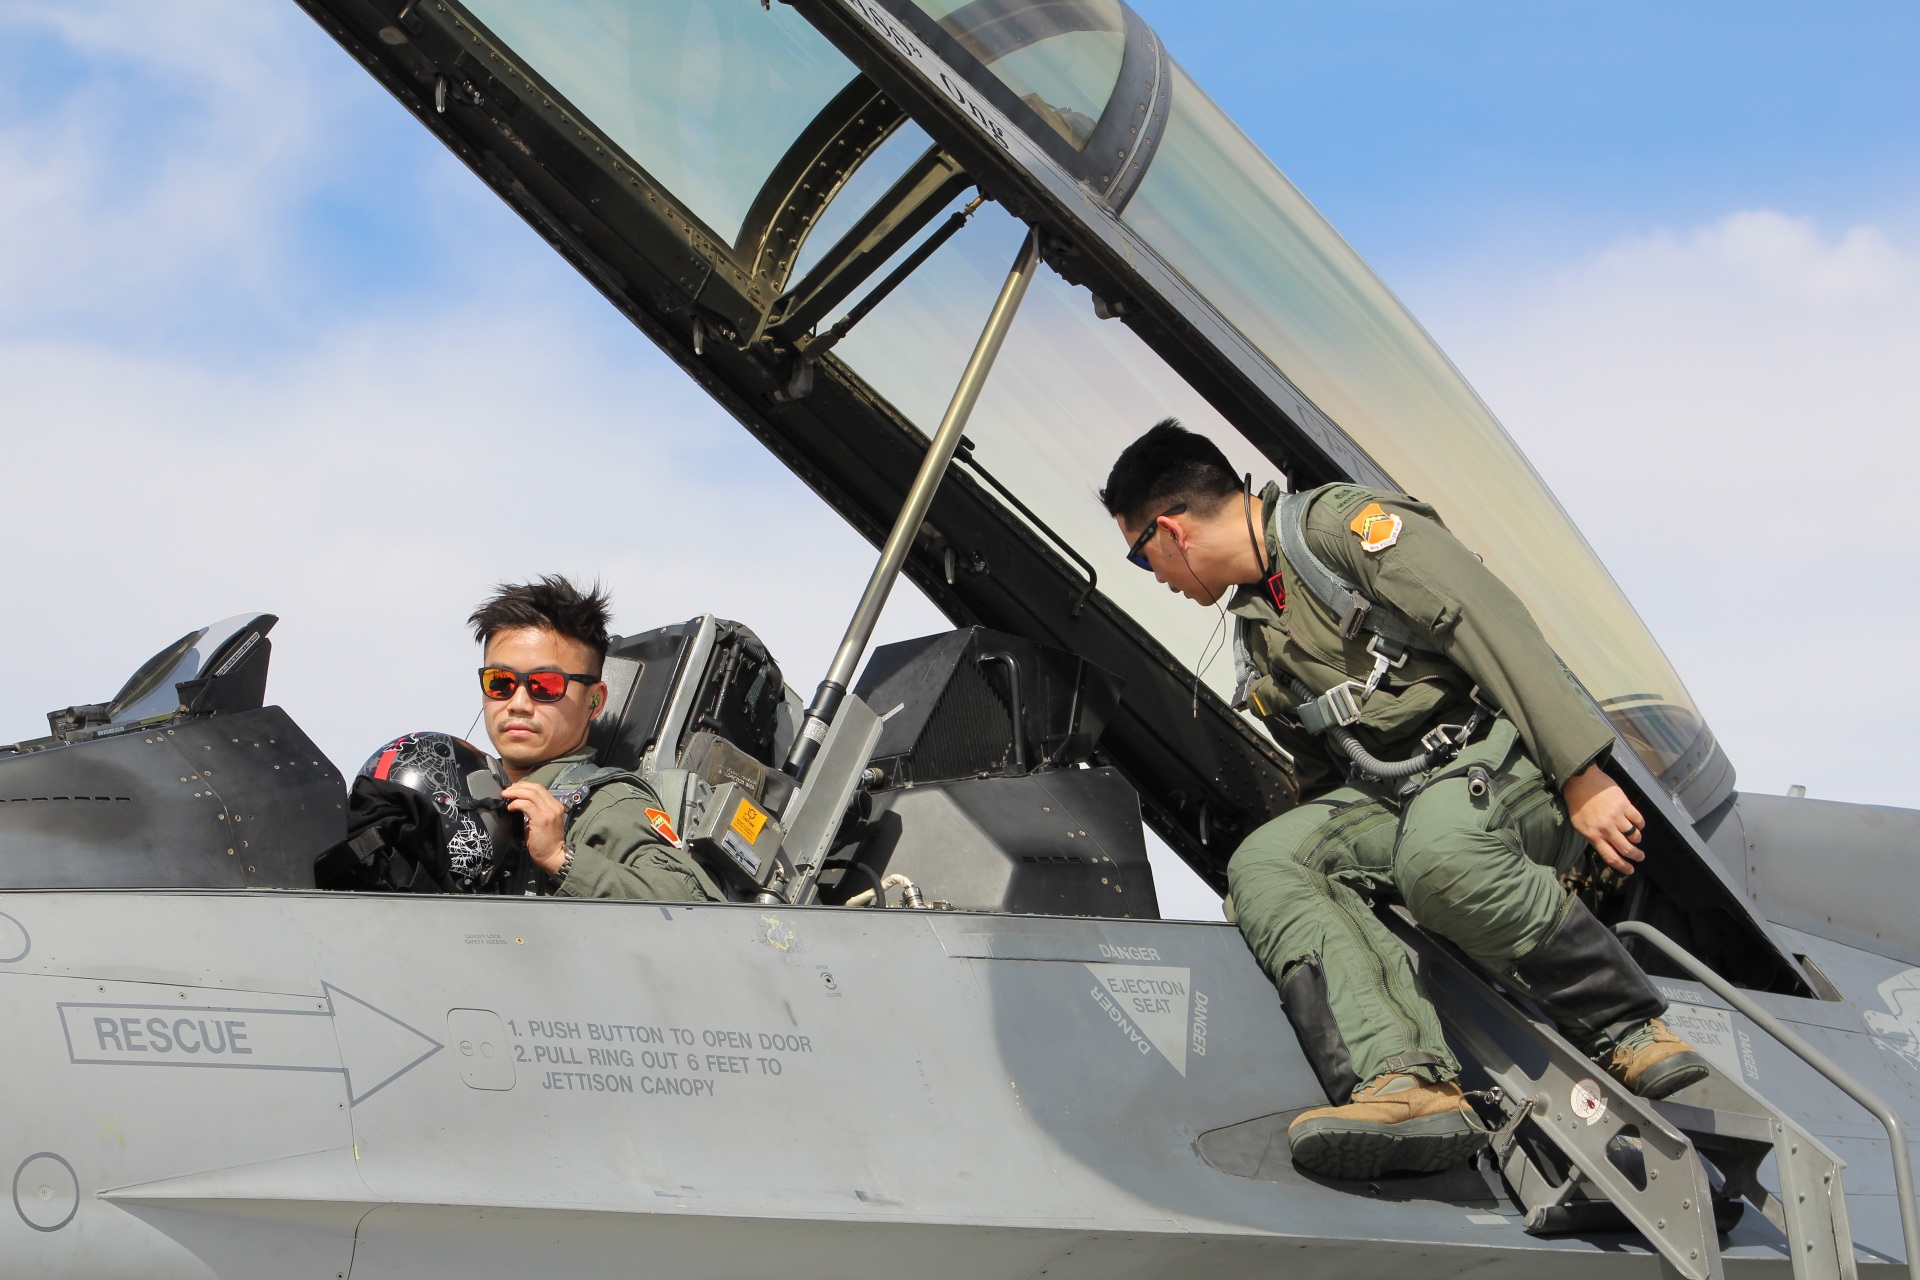 The RSAF's Pilots from PC II detachment conducting flight preparations as part of XRFN 22.